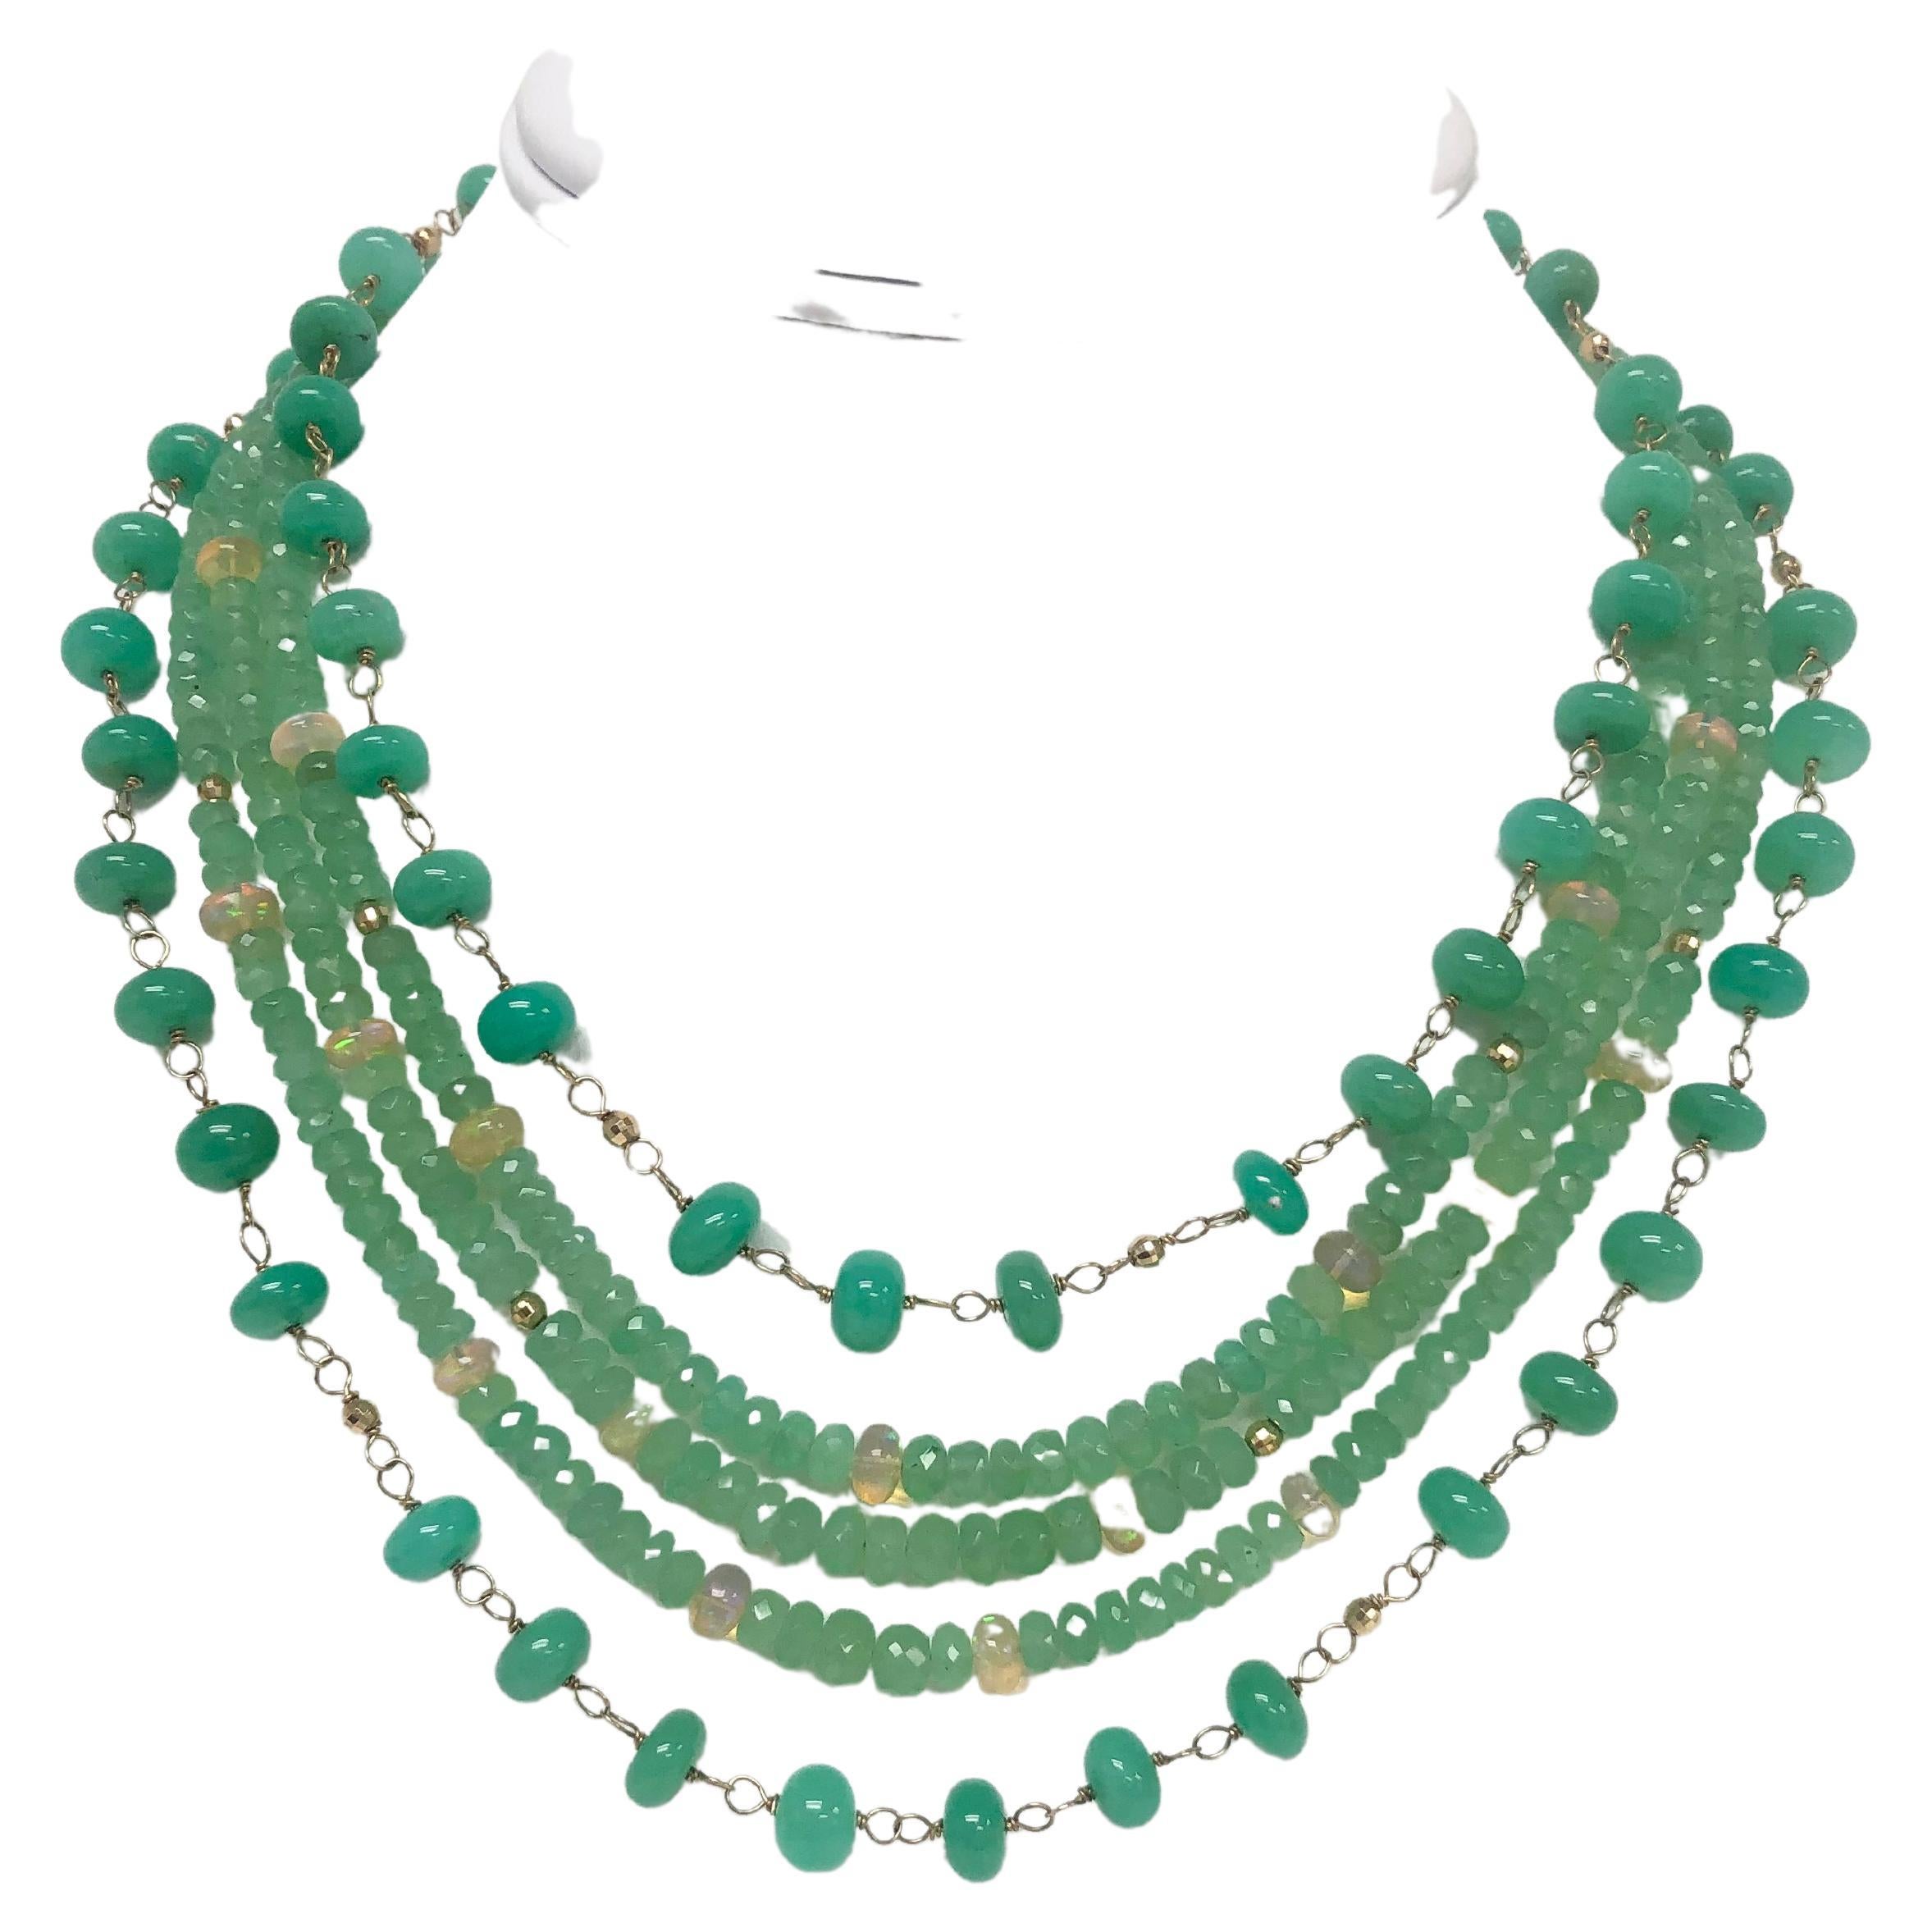 Green lover’s heaven, vibrant color 323 carats Chrysoprase and 11 carats Walo Ethiopian Opals, five-strand necklace. 
Item # N3764

Materials and Weight
Chrysoprase, two strands, 8mm smooth, rondelle shape, 158 carats.
Chrysoprase, three strands, 4